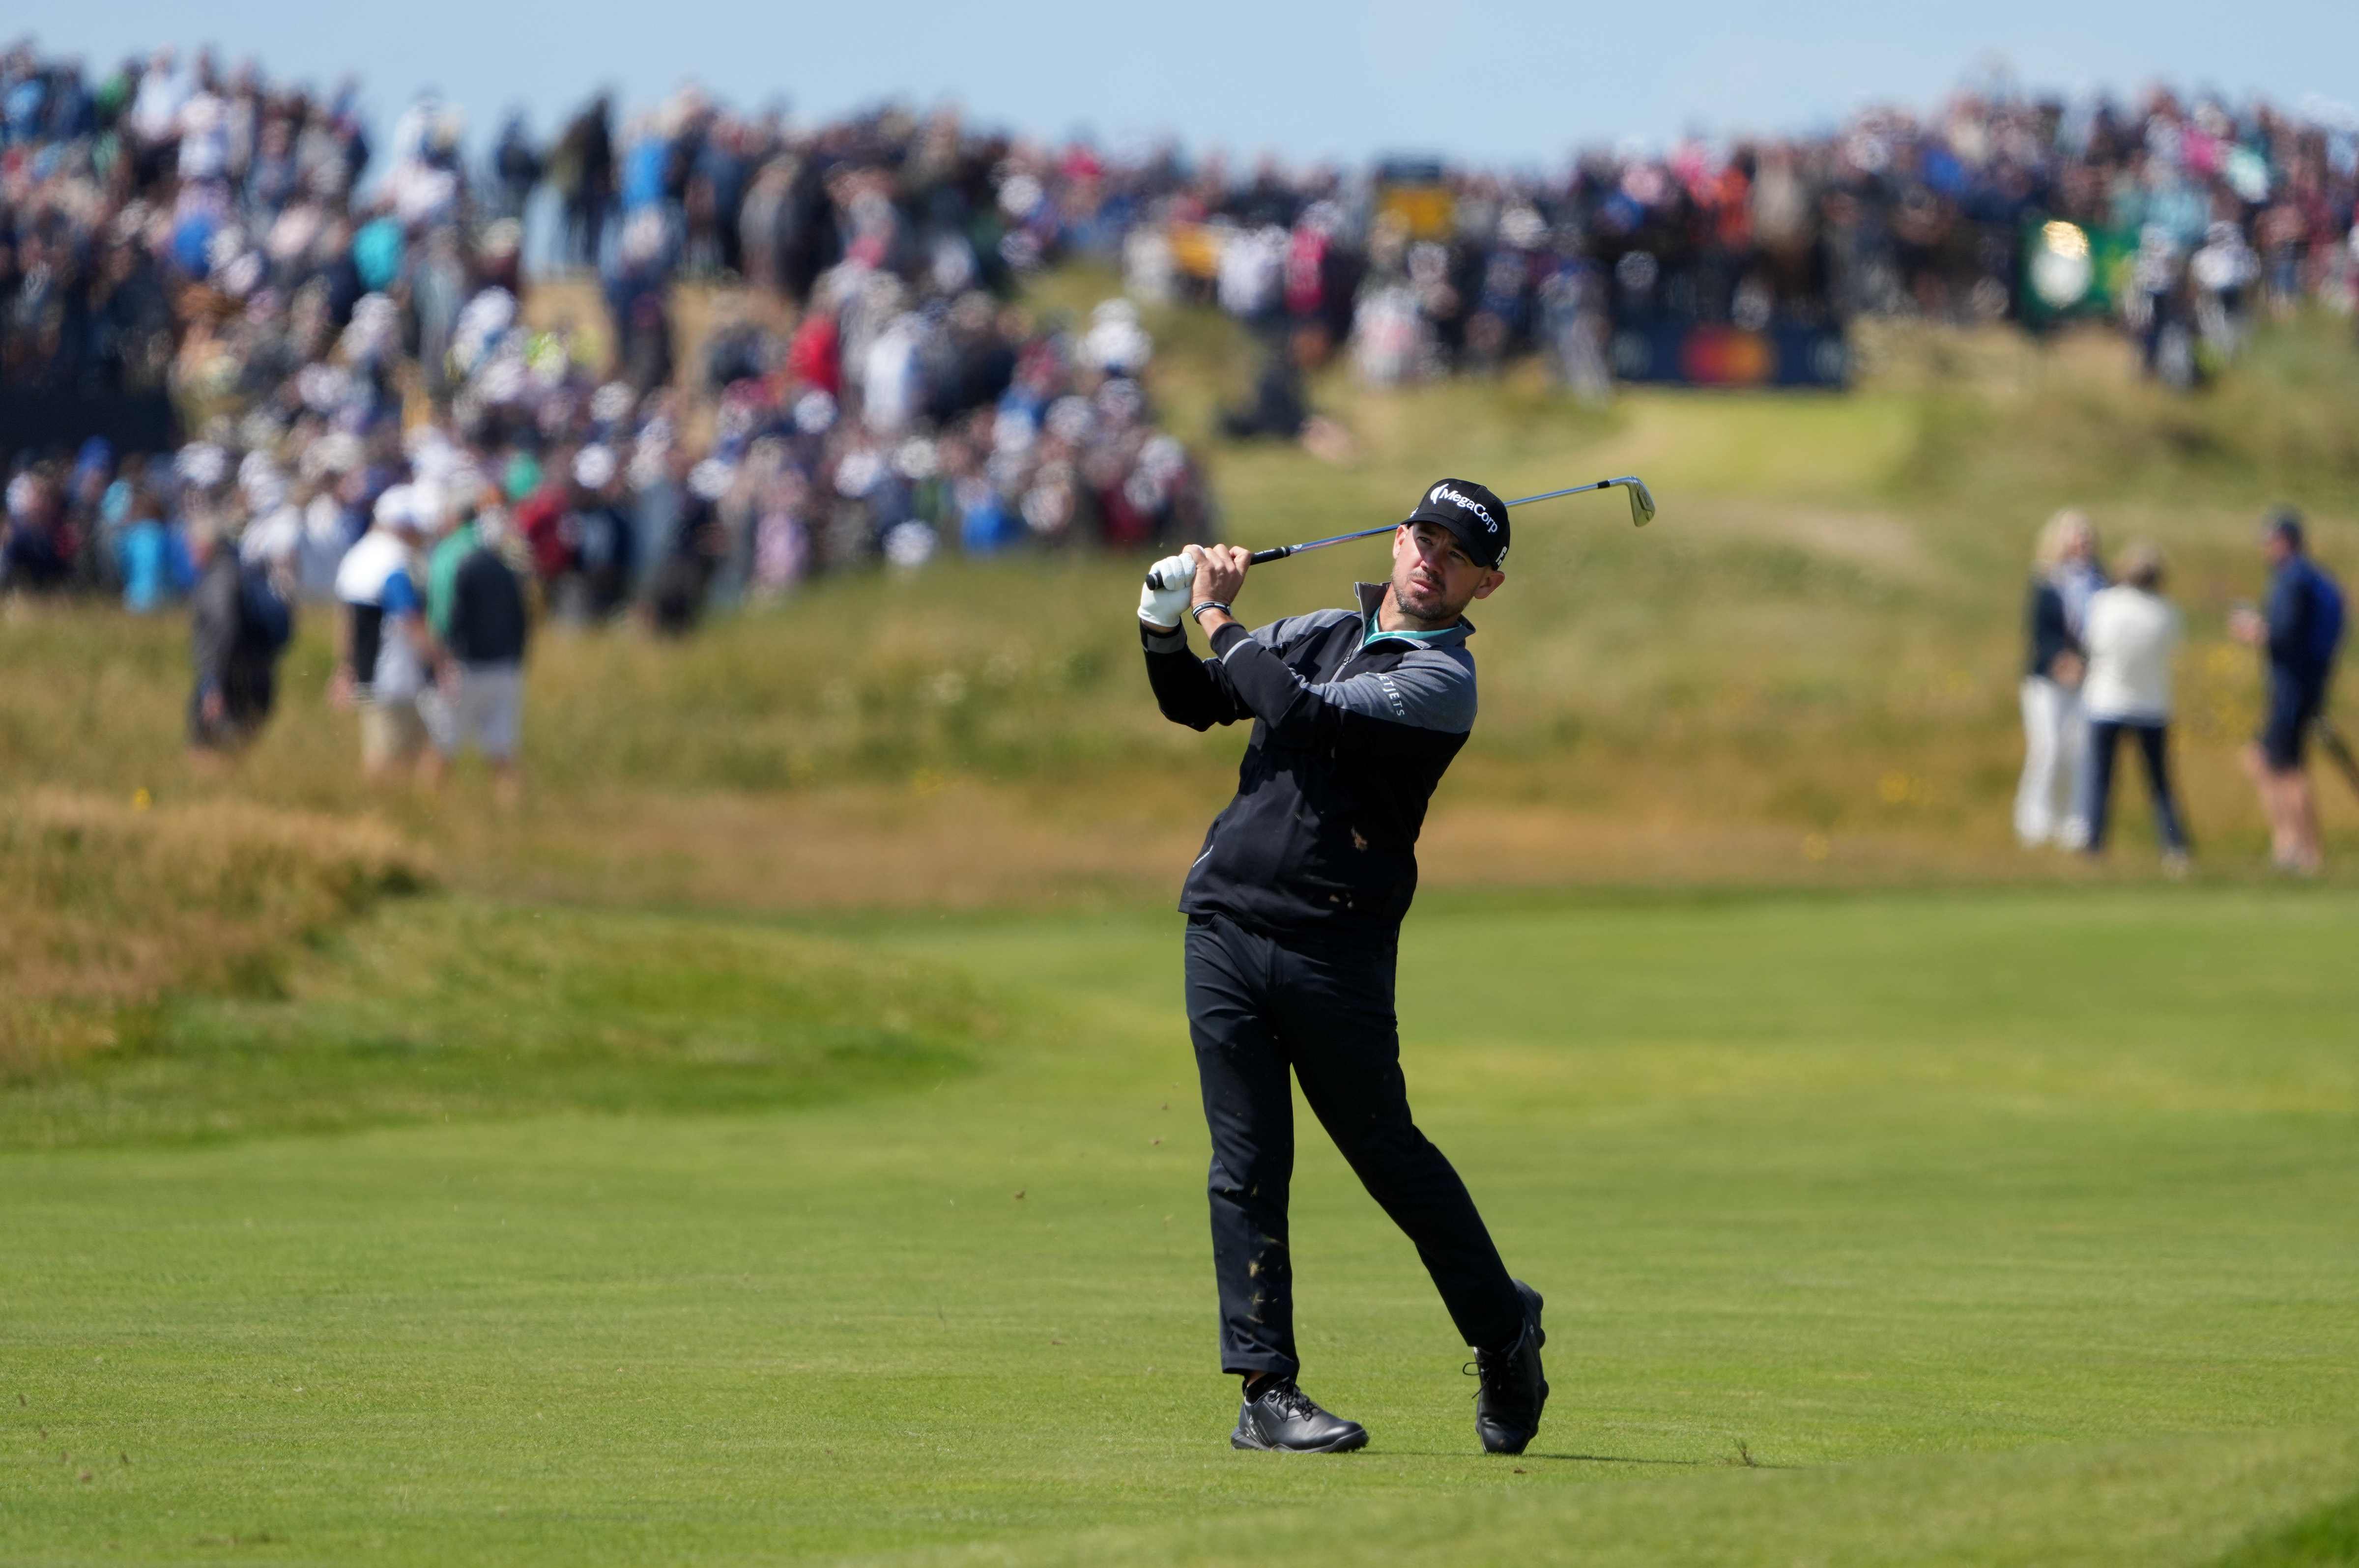 Brian Harman plays on the fifteenth hole during the second round of The Open Championship golf tournament at Royal Liverpool.